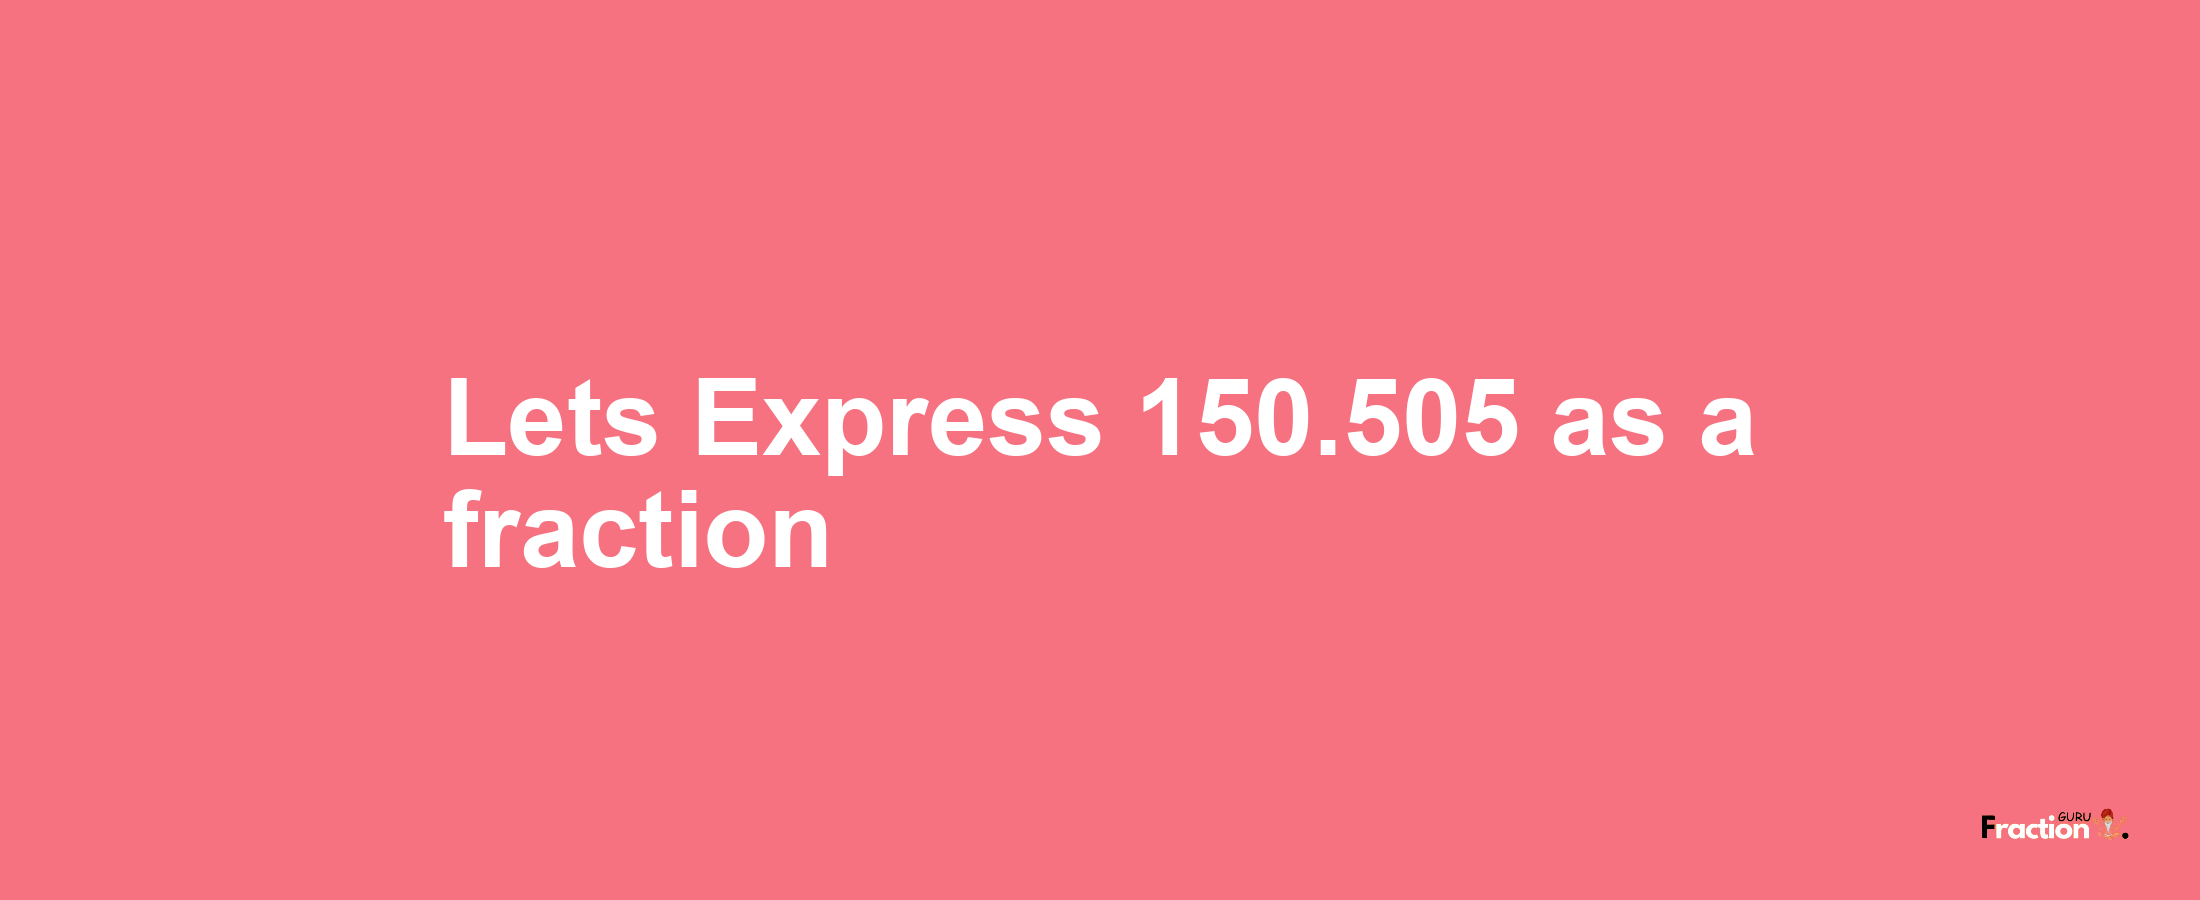 Lets Express 150.505 as afraction